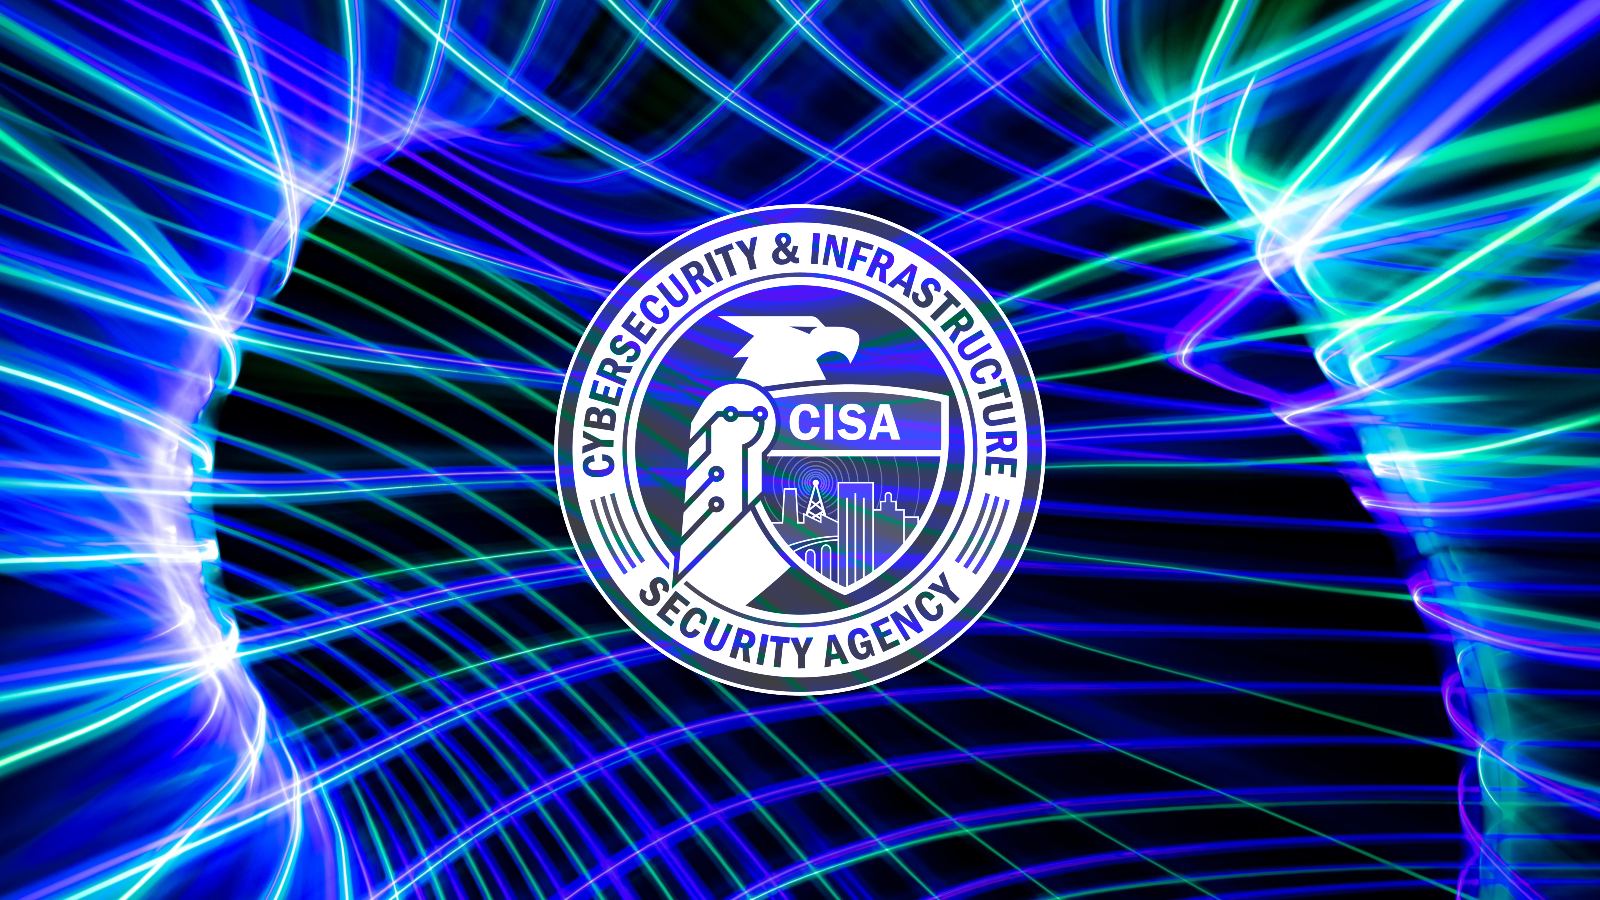 CISA adds 41 vulnerabilities to list of bugs used in cyberattacks